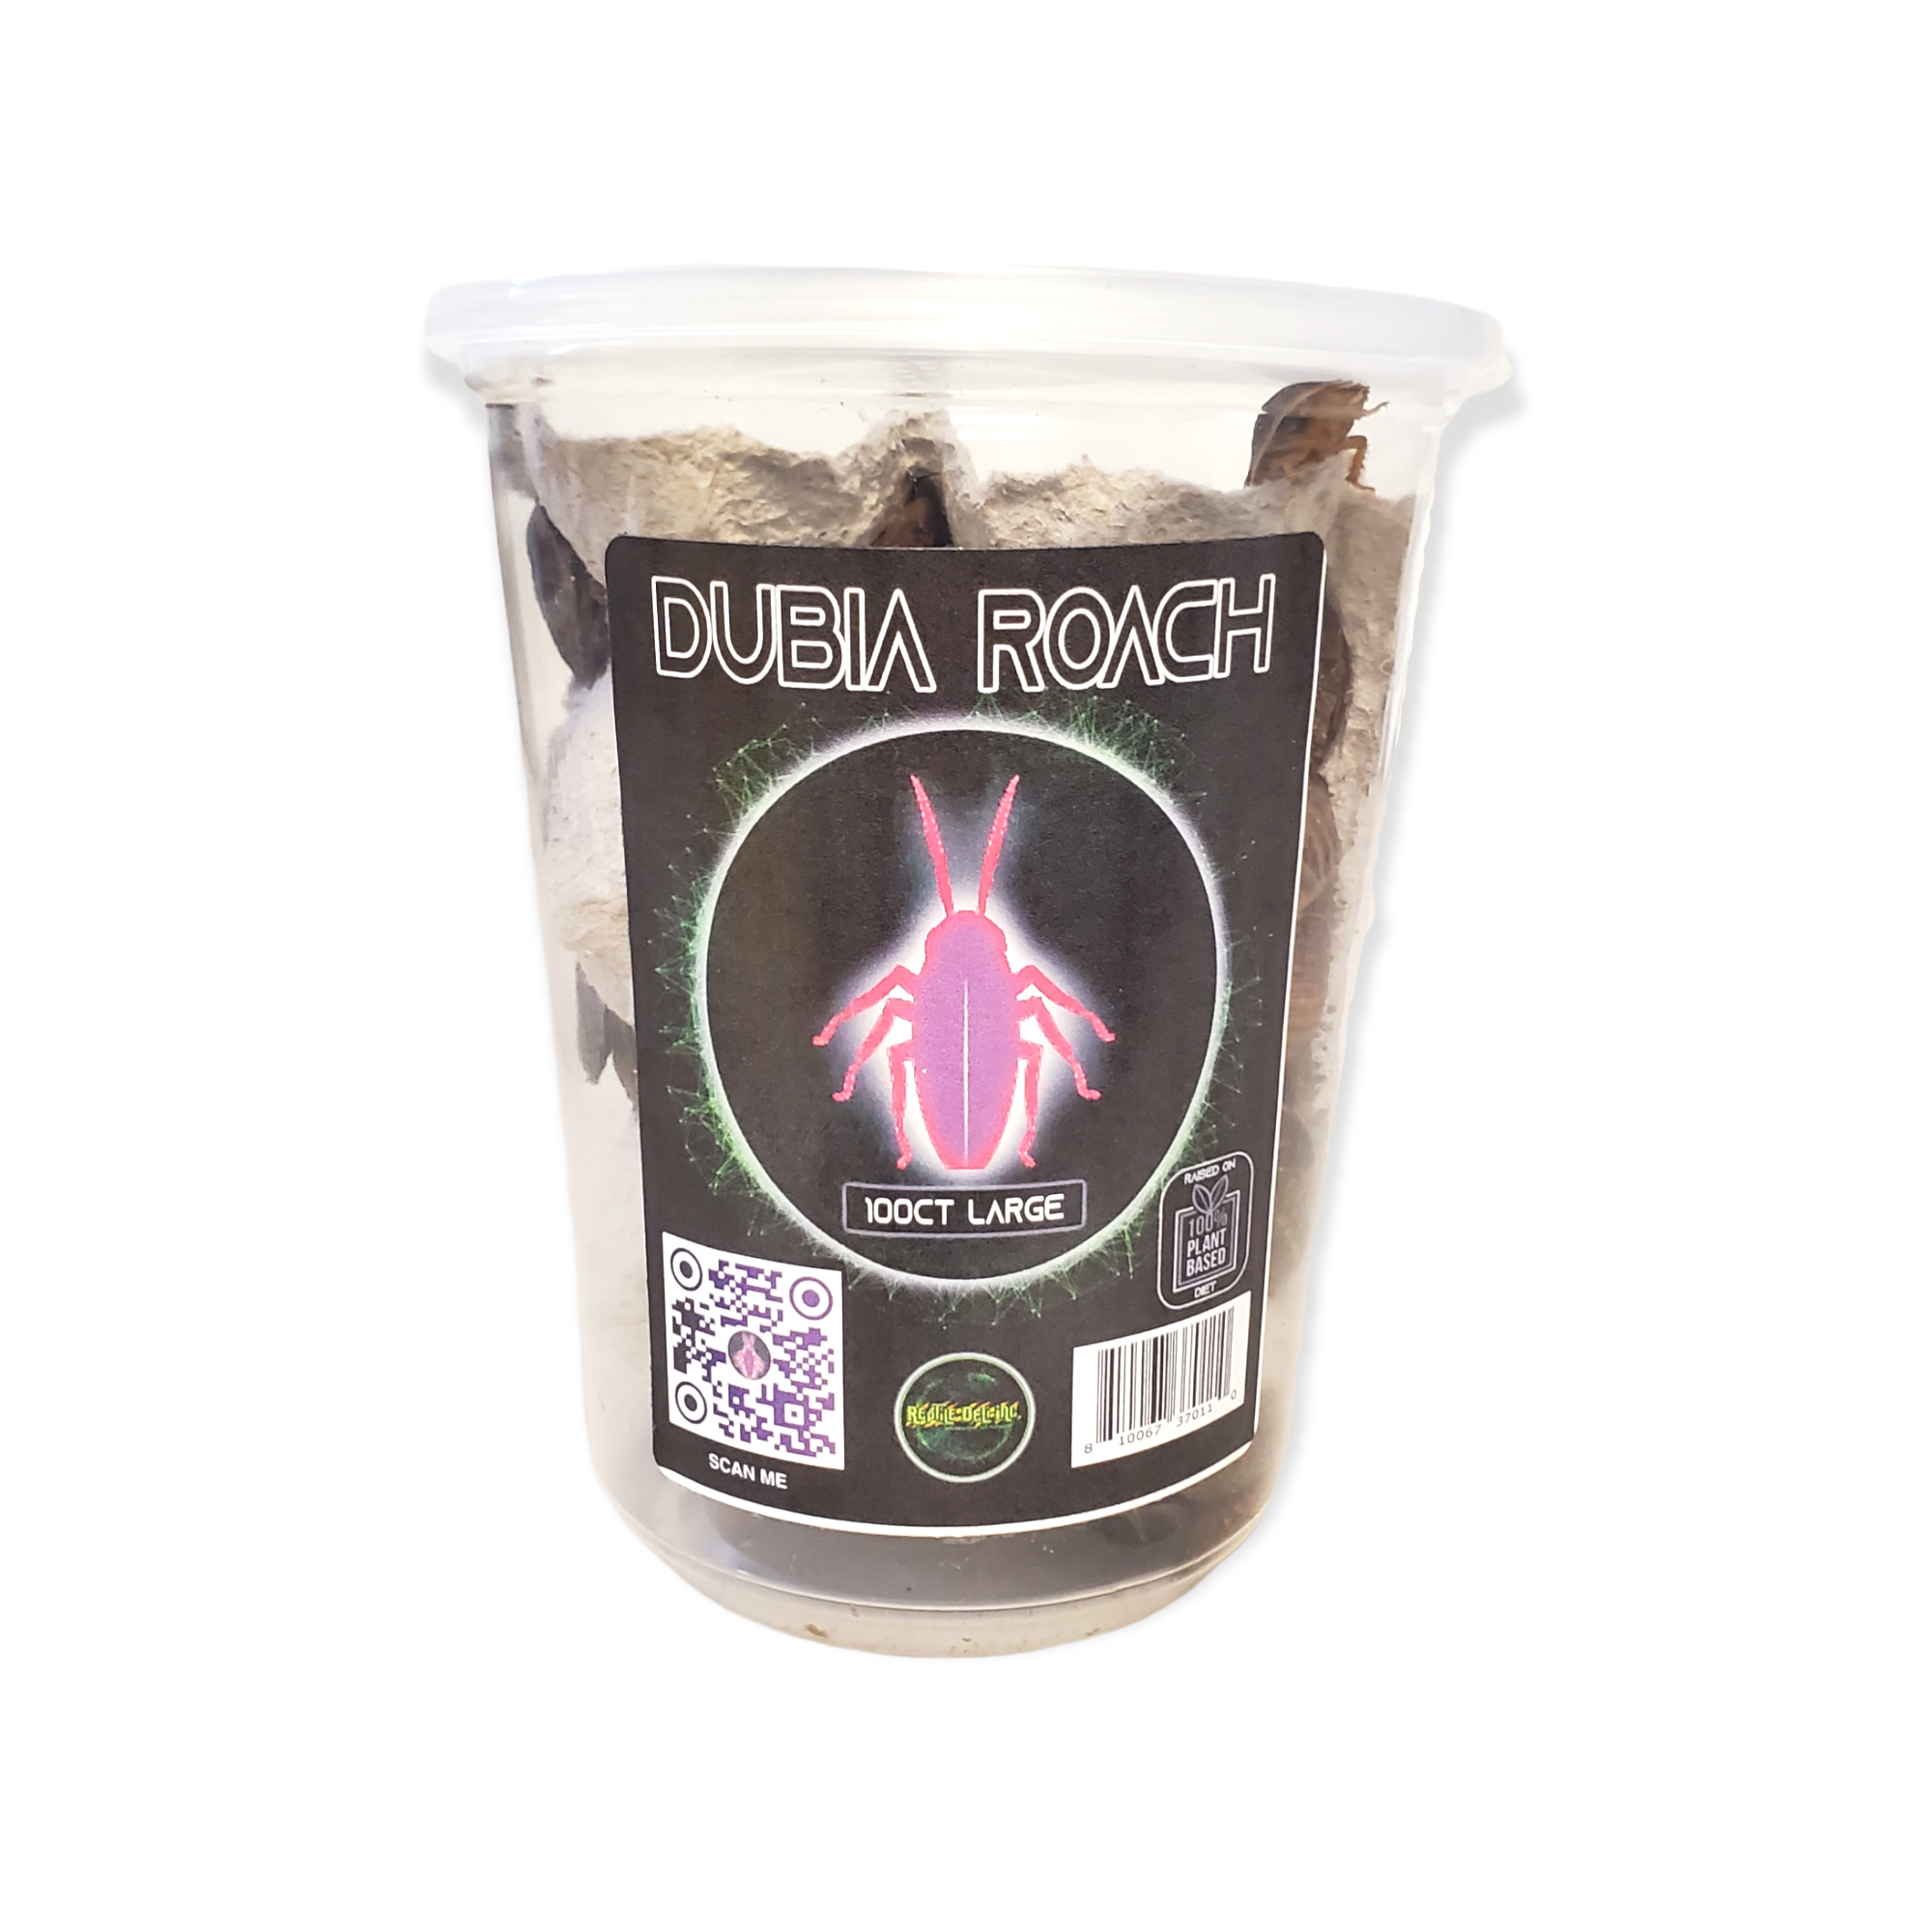 Dubia Roach - Large - Cupped Roaches Reptile Food (50ct) 10.00% Off Auto renew - Reptile Deli Inc.